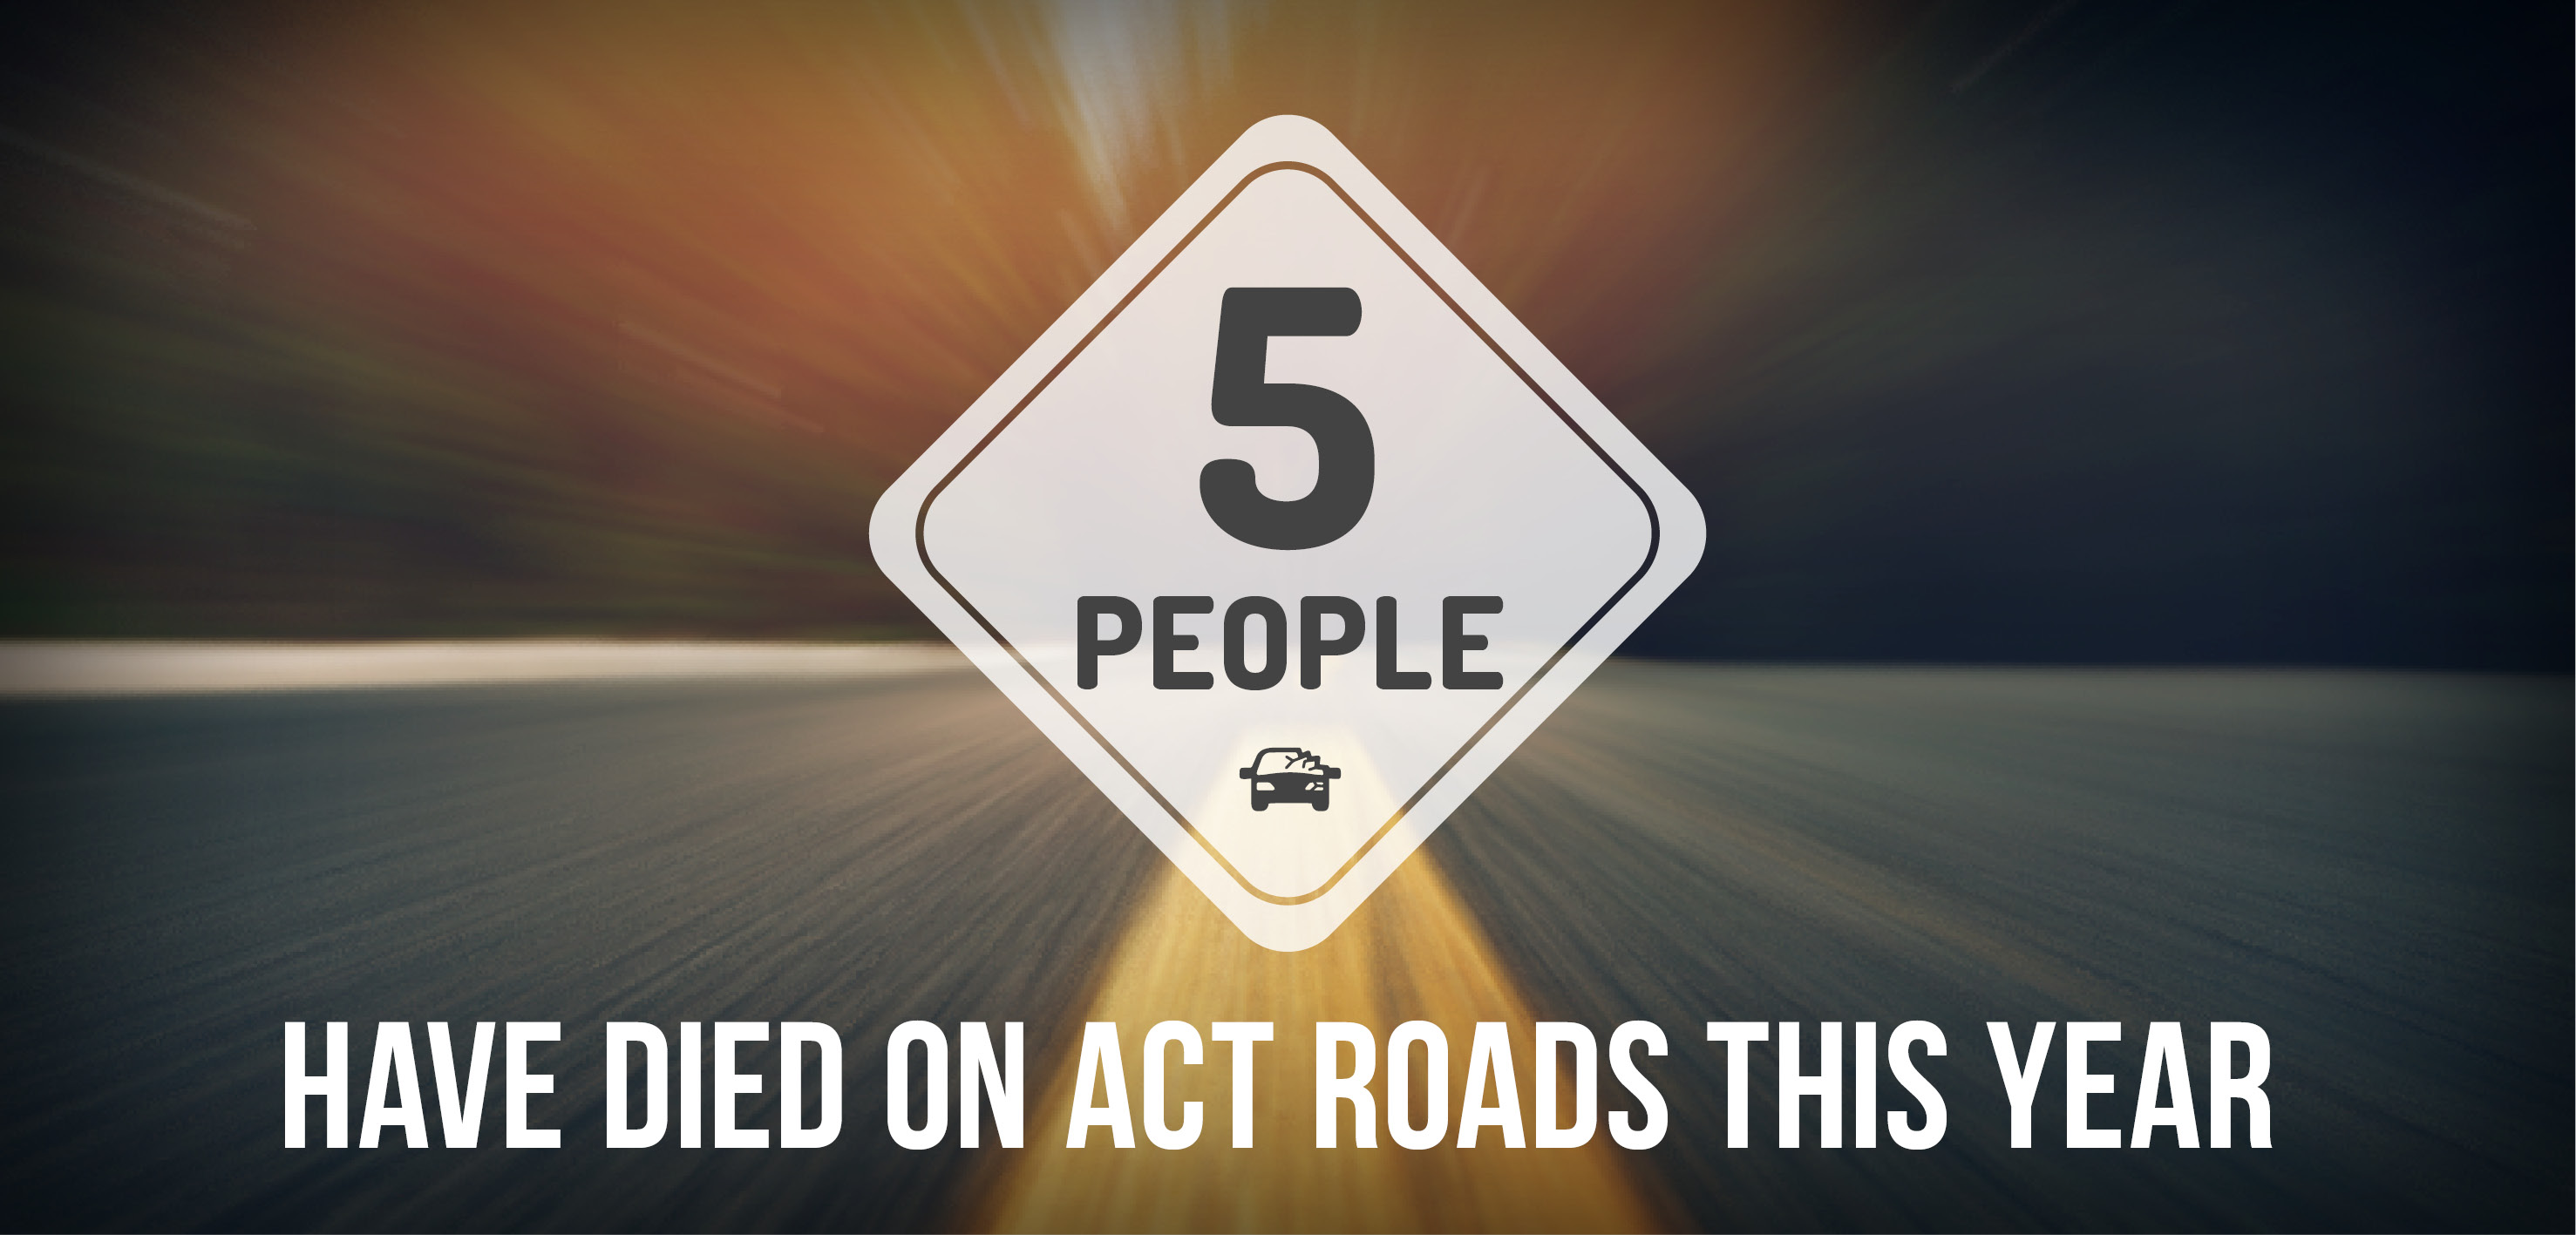 Fifth fatality on ACT roads in 2019